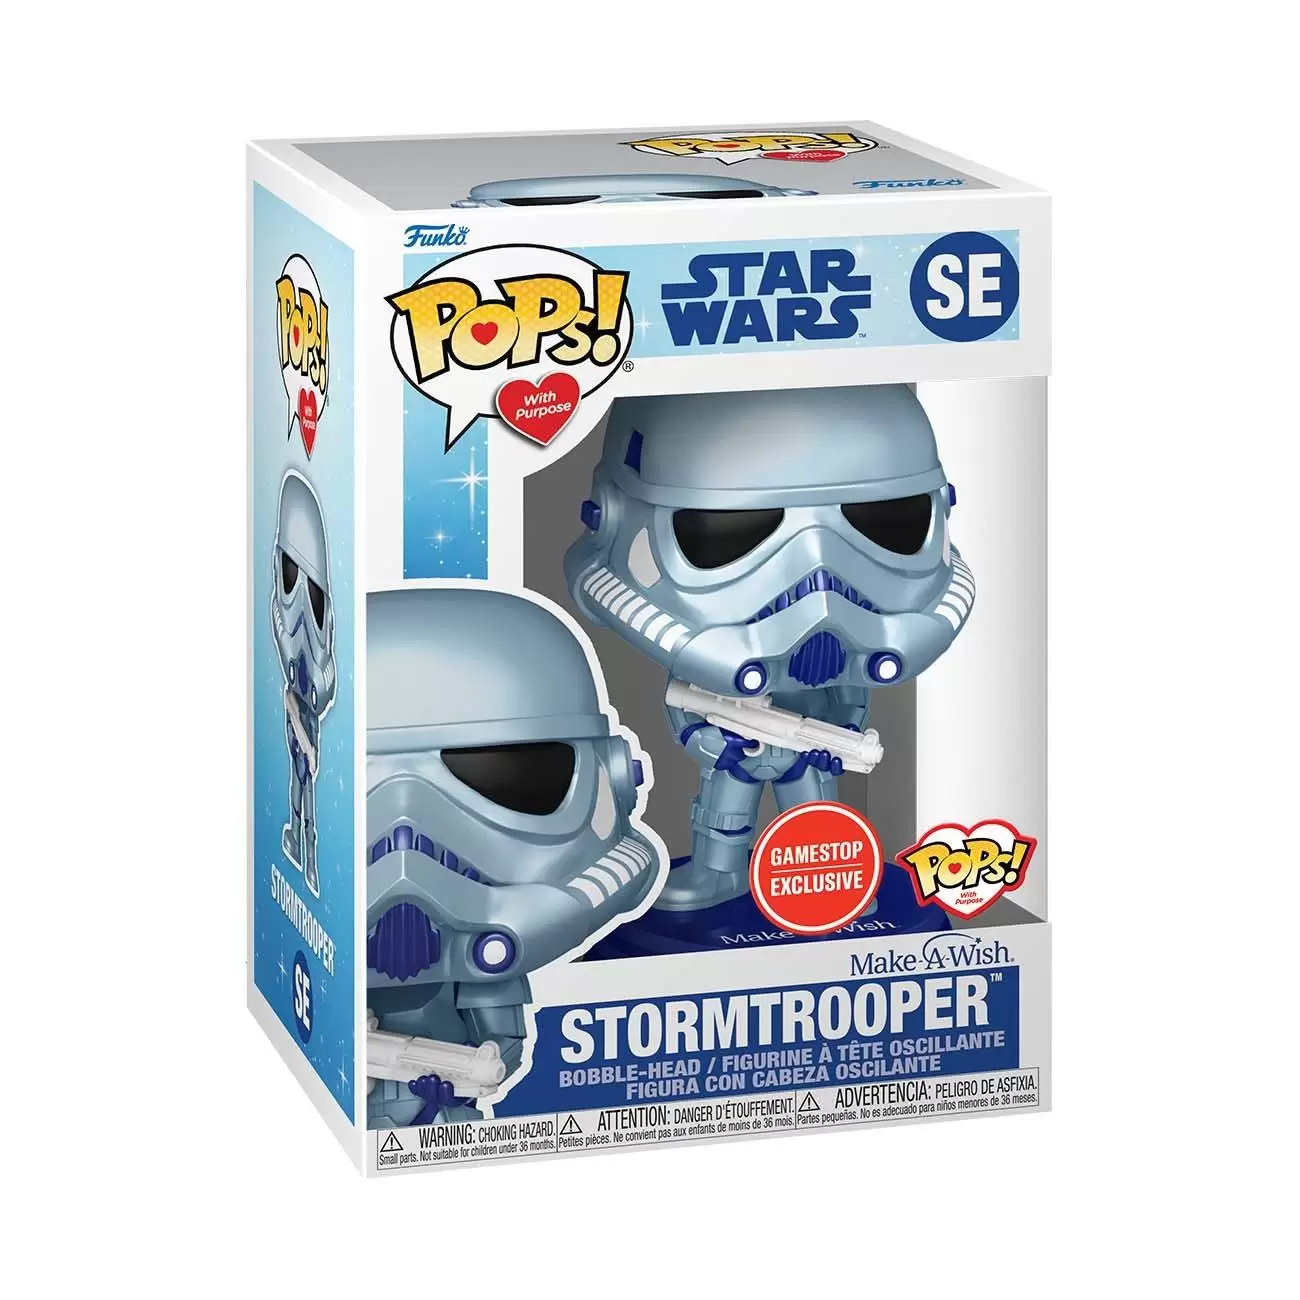 Pops With Purpose (PWP) - Make-A-Wish - Stormtrooper